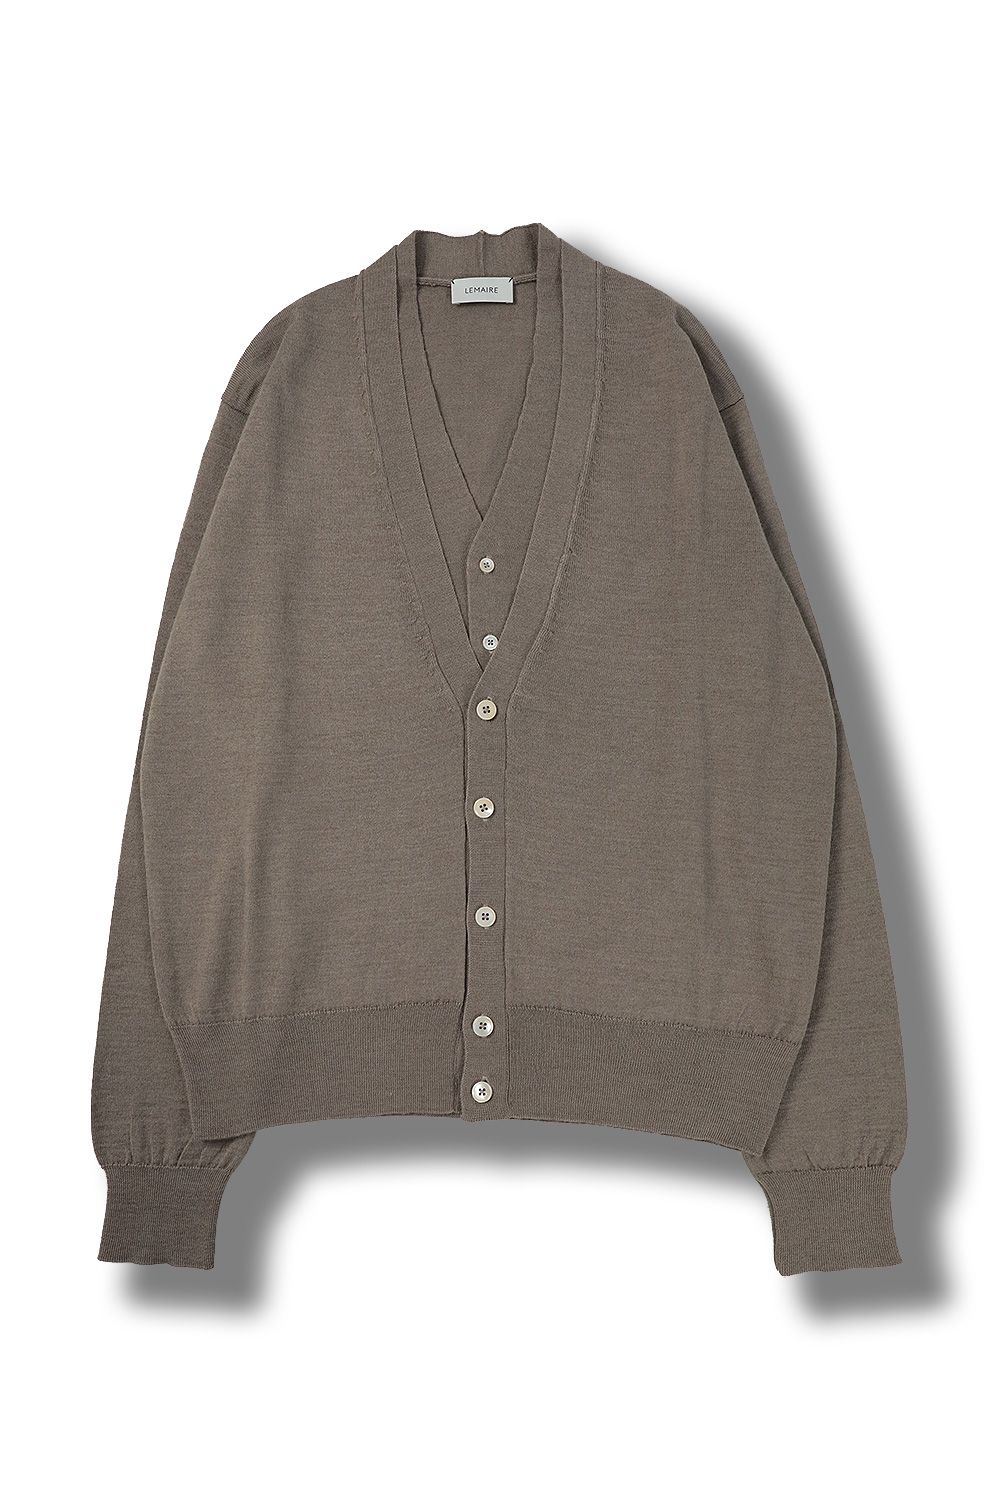 KNITTED DOUBLE COLLAR CARDIGAN(GREY BEIGE) - S